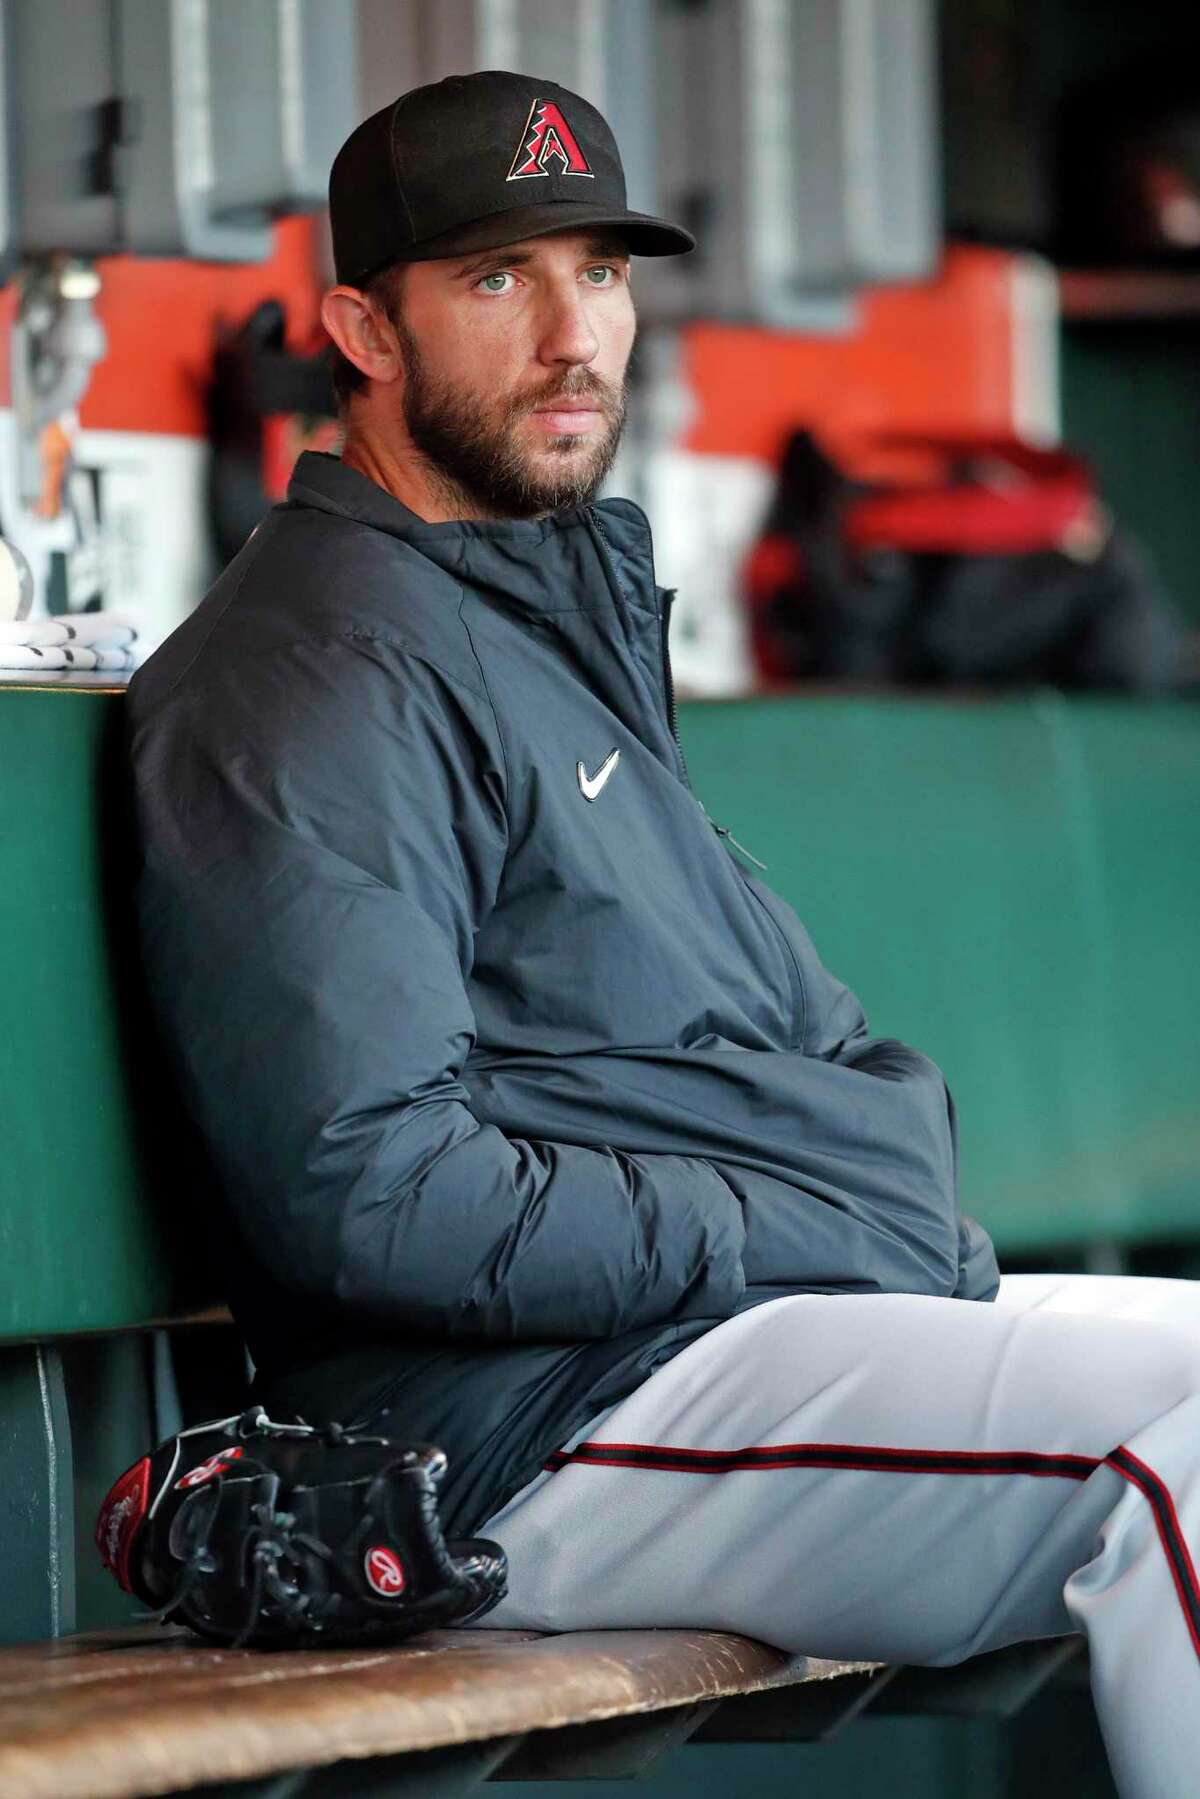 World Series 2014: Madison Bumgarner Rises to the Moment, and Jaws Drop -  The New York Times